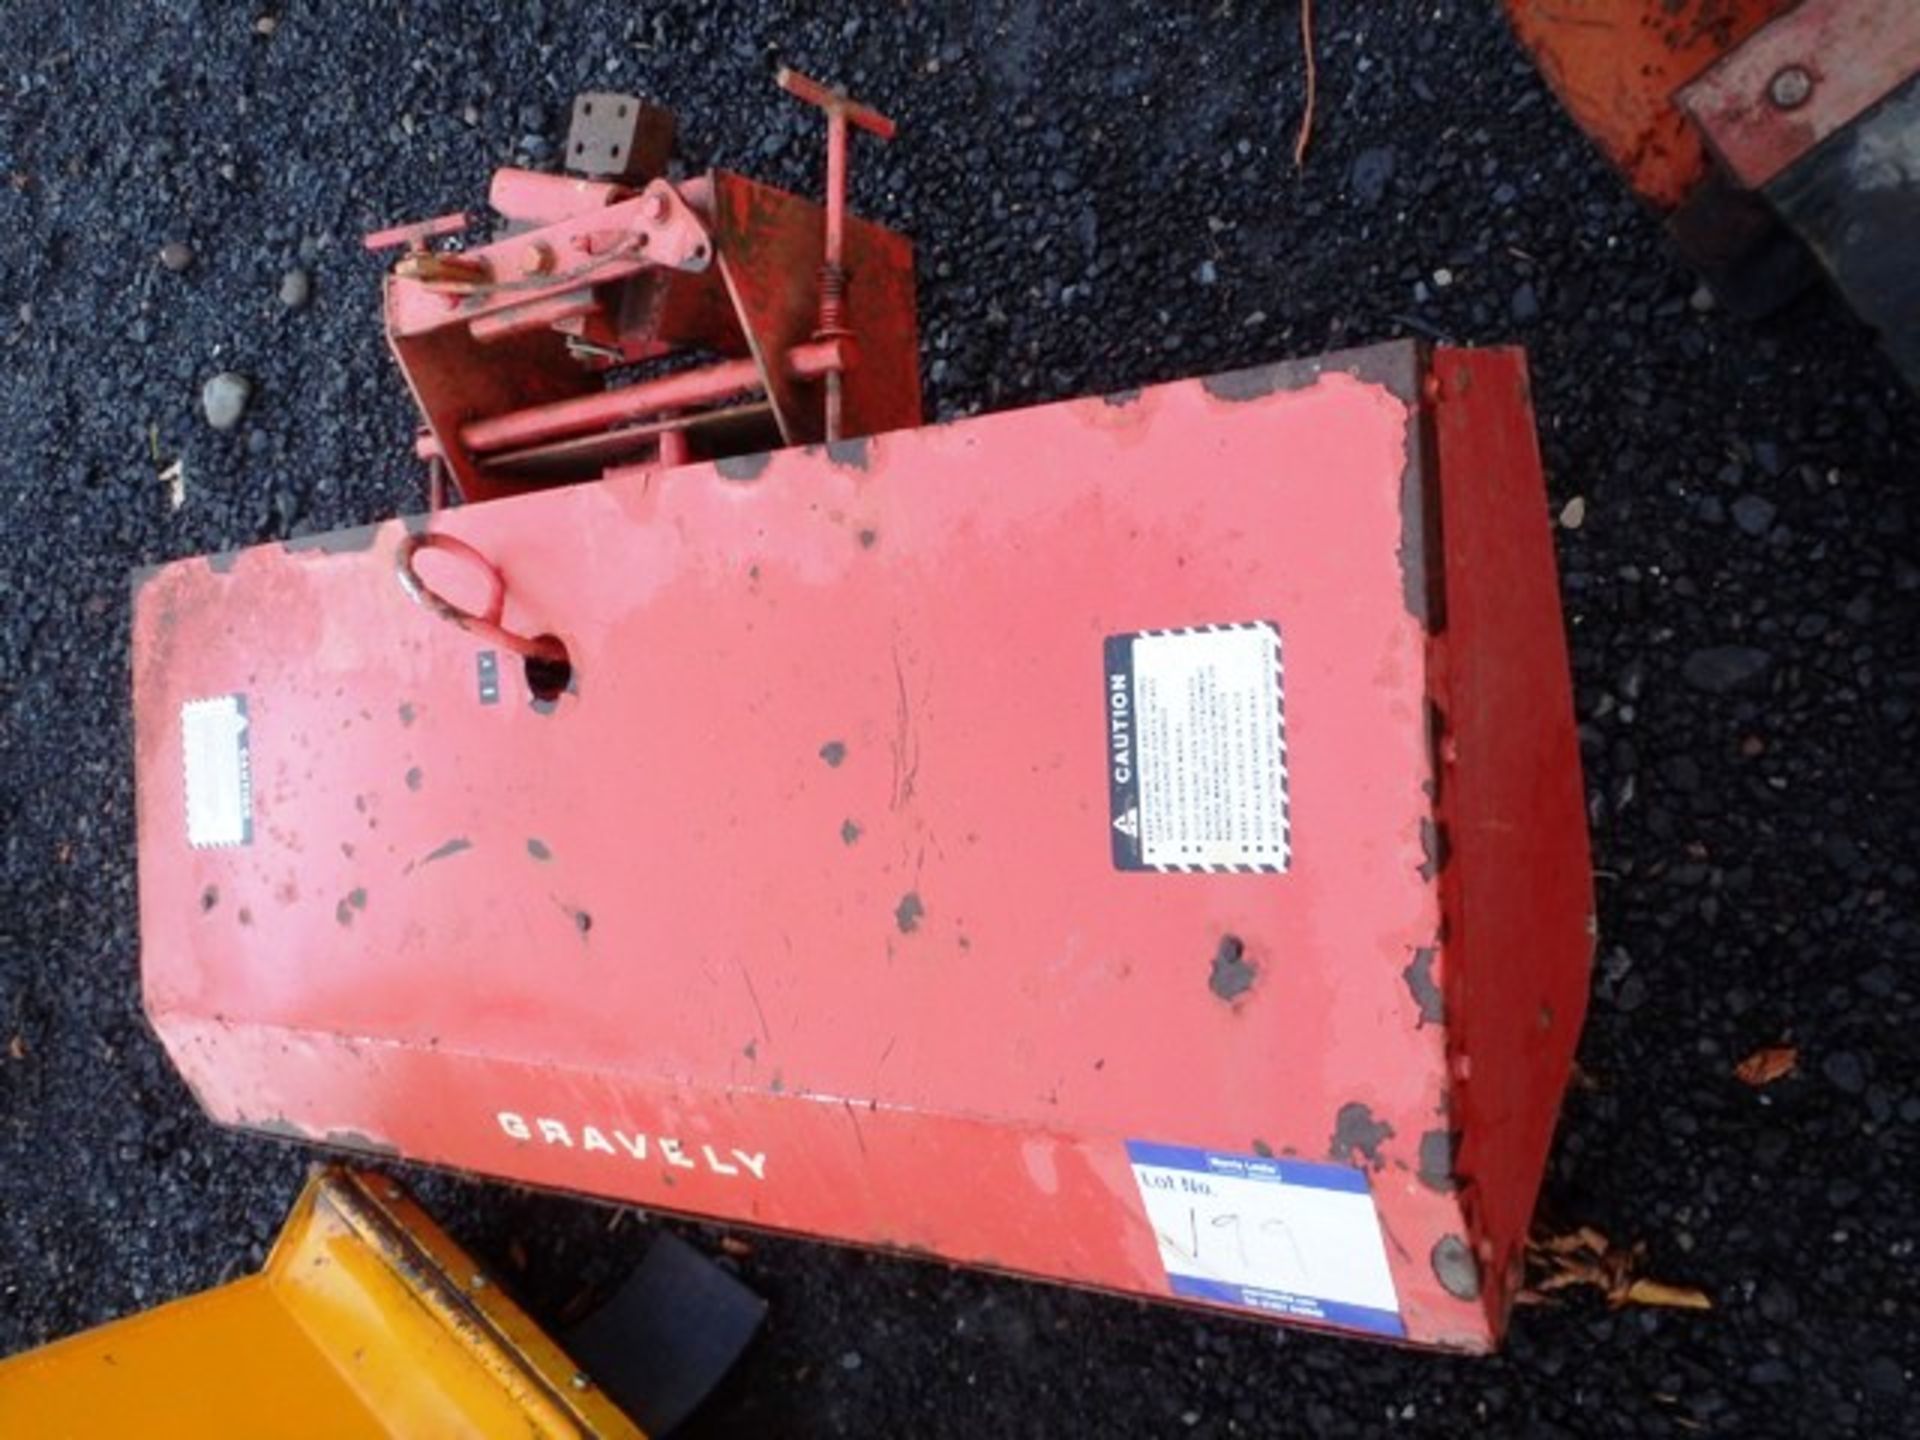 GRAVELY SNOW PLOUGH C/W ROTARY BRUSH, GRASS MOWER & SCRAPER ATTACHMENTS - Image 3 of 4